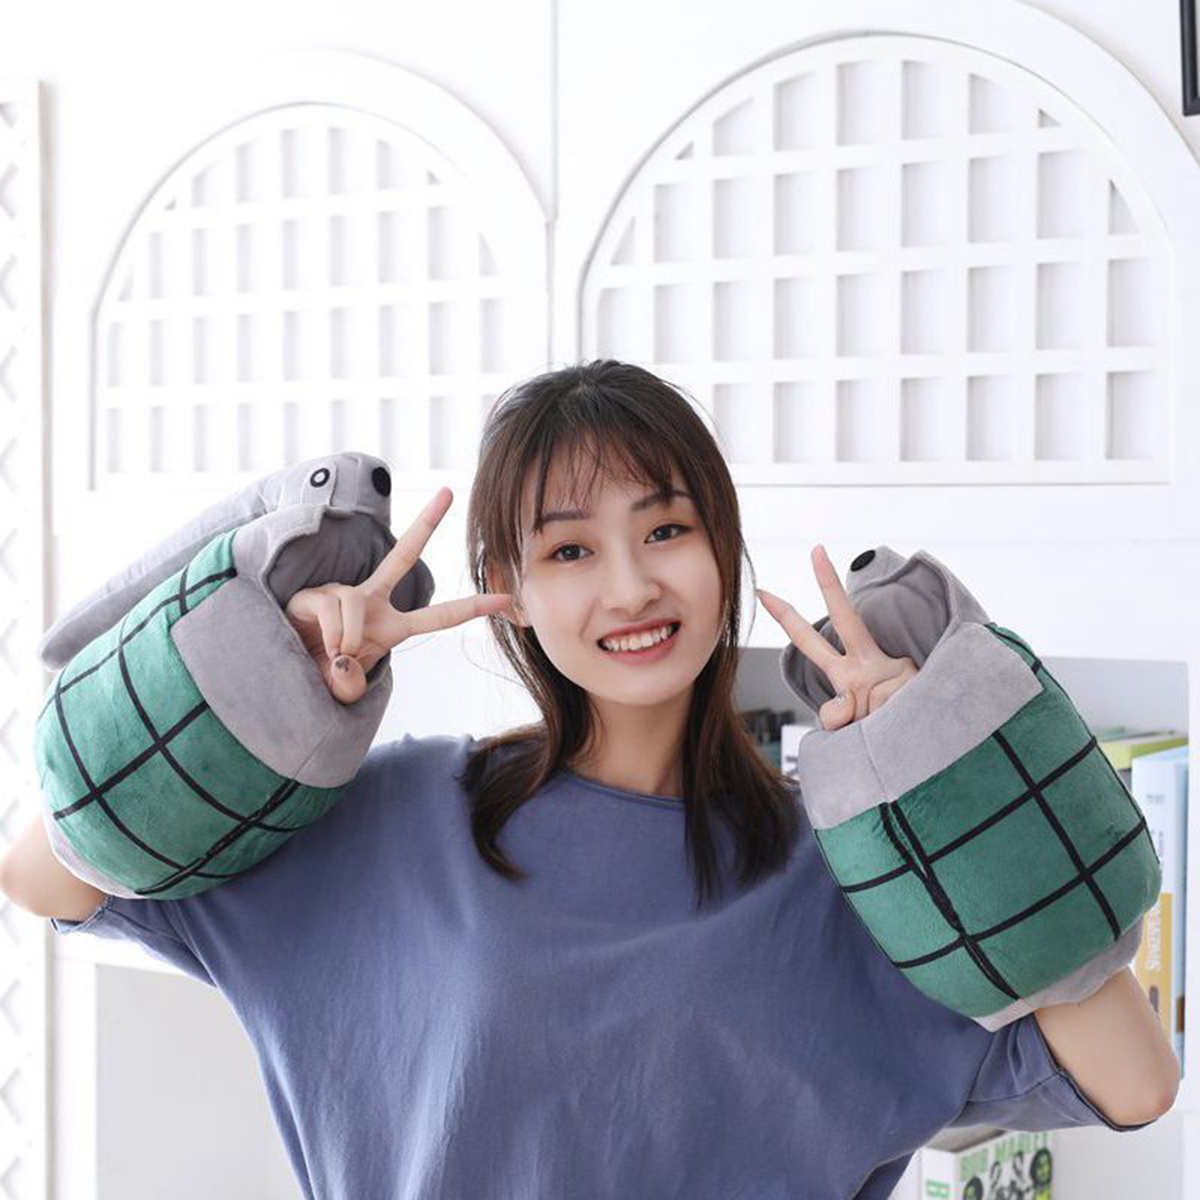 1-Pair-Costumes-Grenade-Gloves-Stuffed-Plush-Toy-Cosplay-Prop-Christmas-Novelty-Gift-1379242